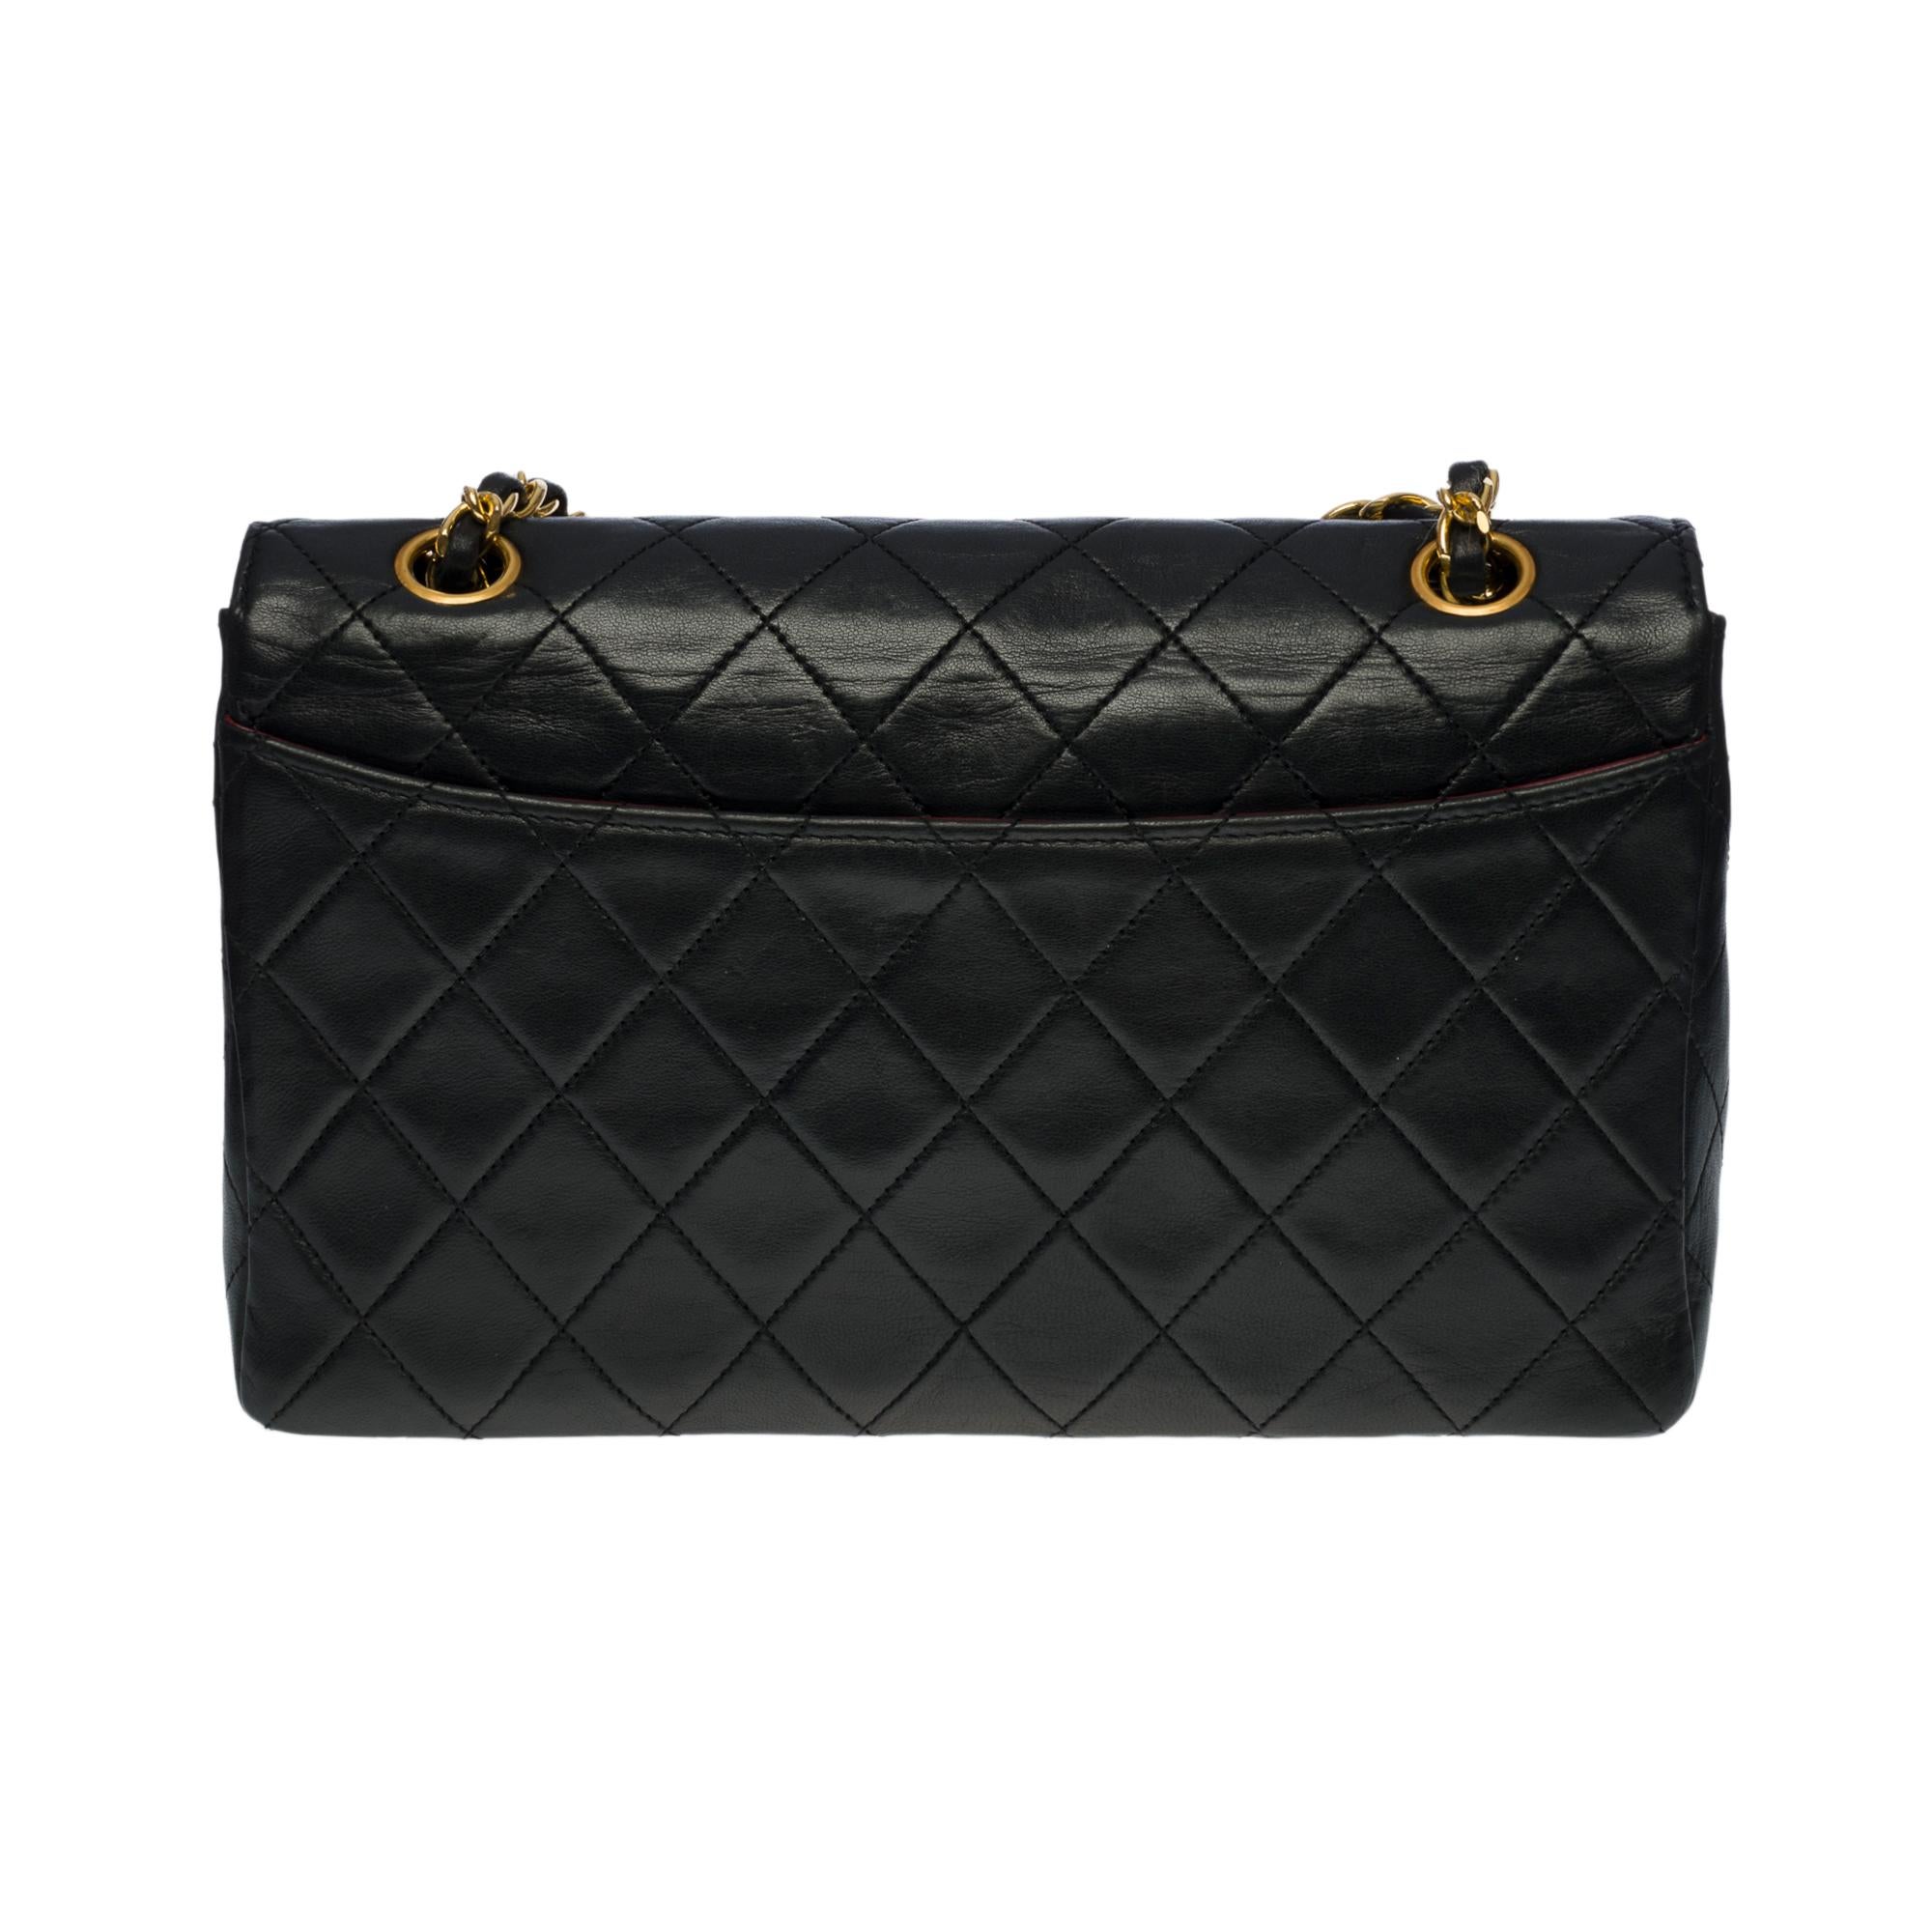 Black Rare Chanel Classic Flap shoulder bag in black quilted lambskin with Pouch, GHW